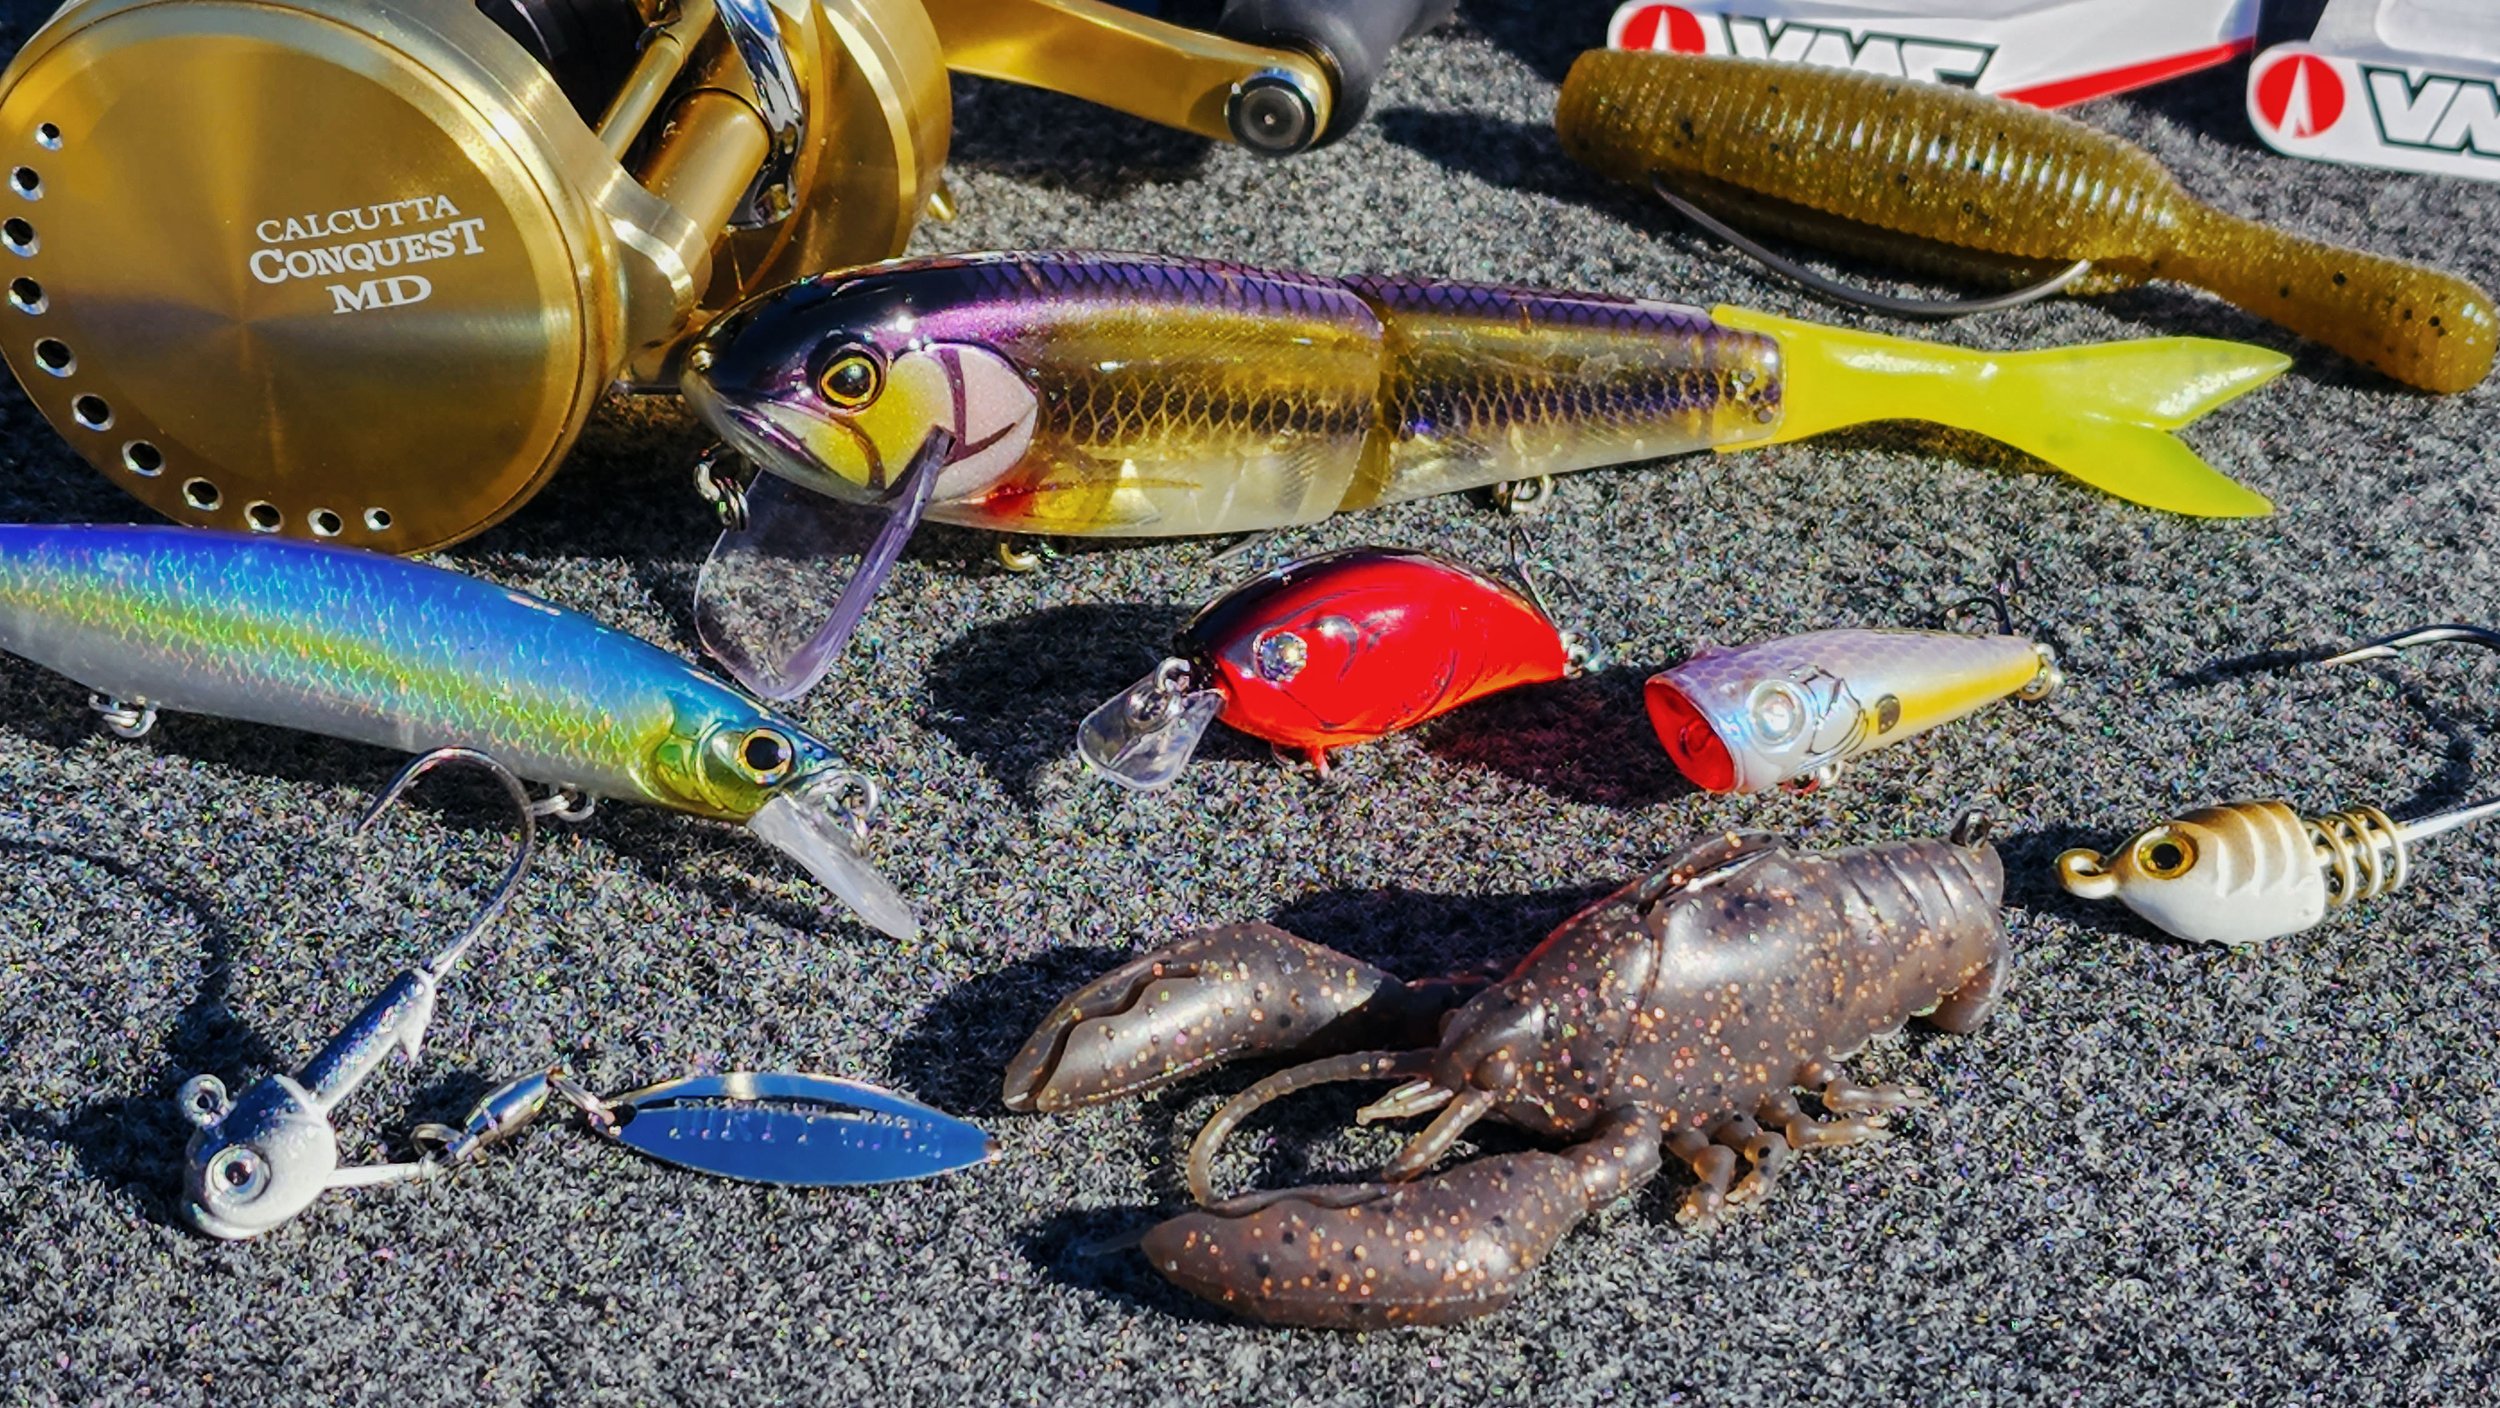 Spring Gear Review! Bassmaster Classic Rods, Reels, Baits, and Hooks! —  Tactical Bassin' - Bass Fishing Blog